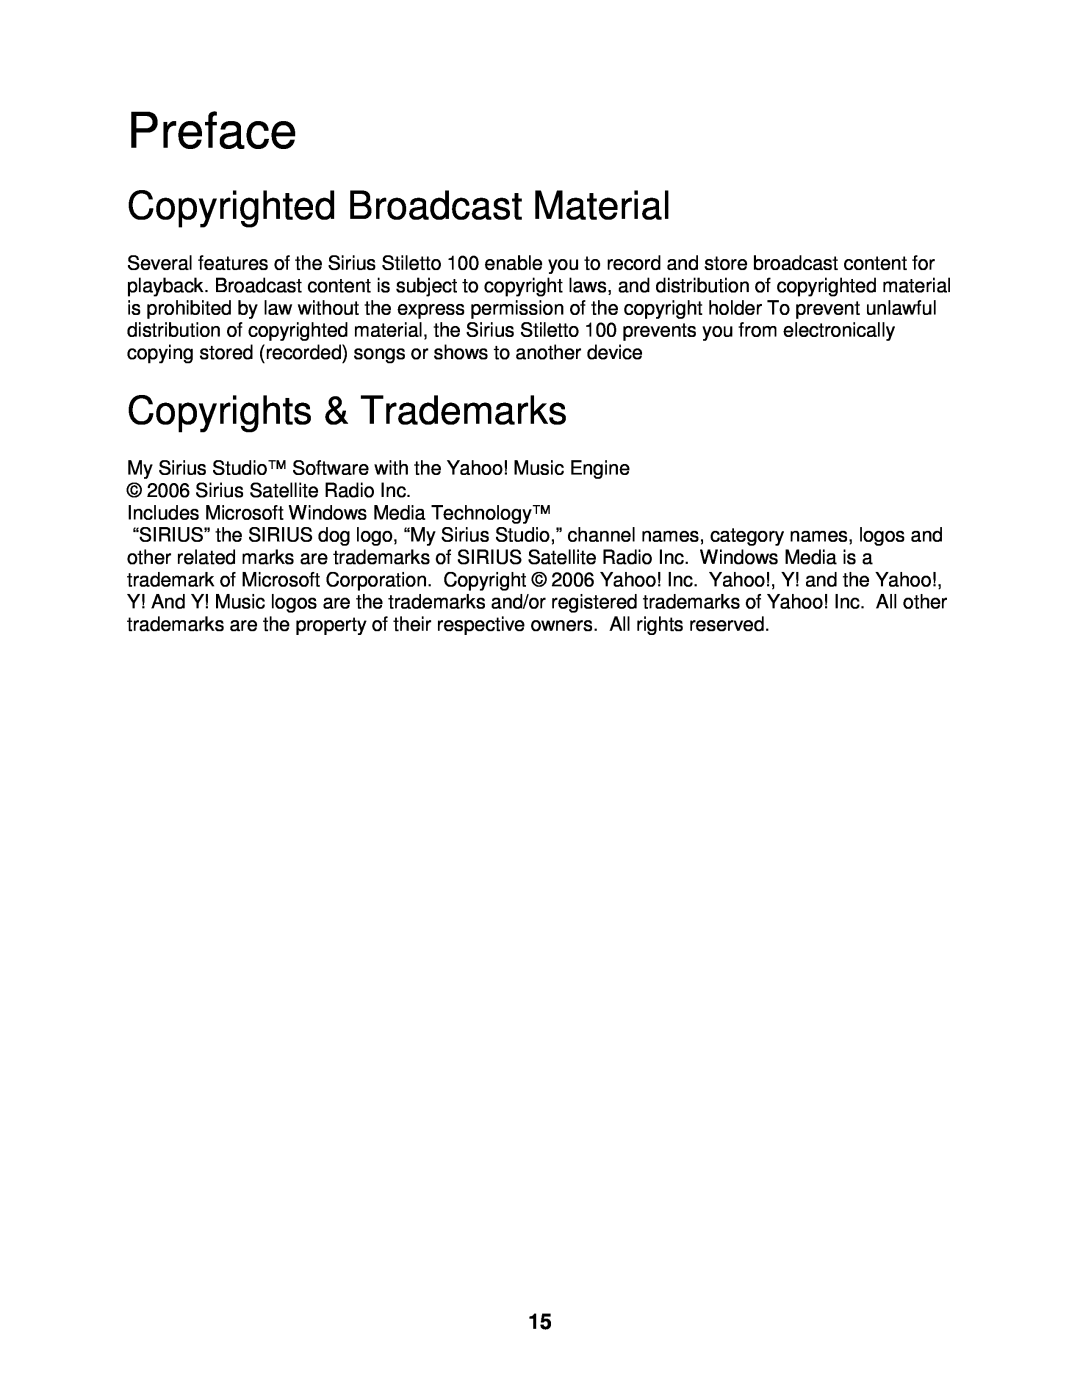 Sirius Satellite Radio 100 manual Preface, Copyrighted Broadcast Material, Copyrights & Trademarks 